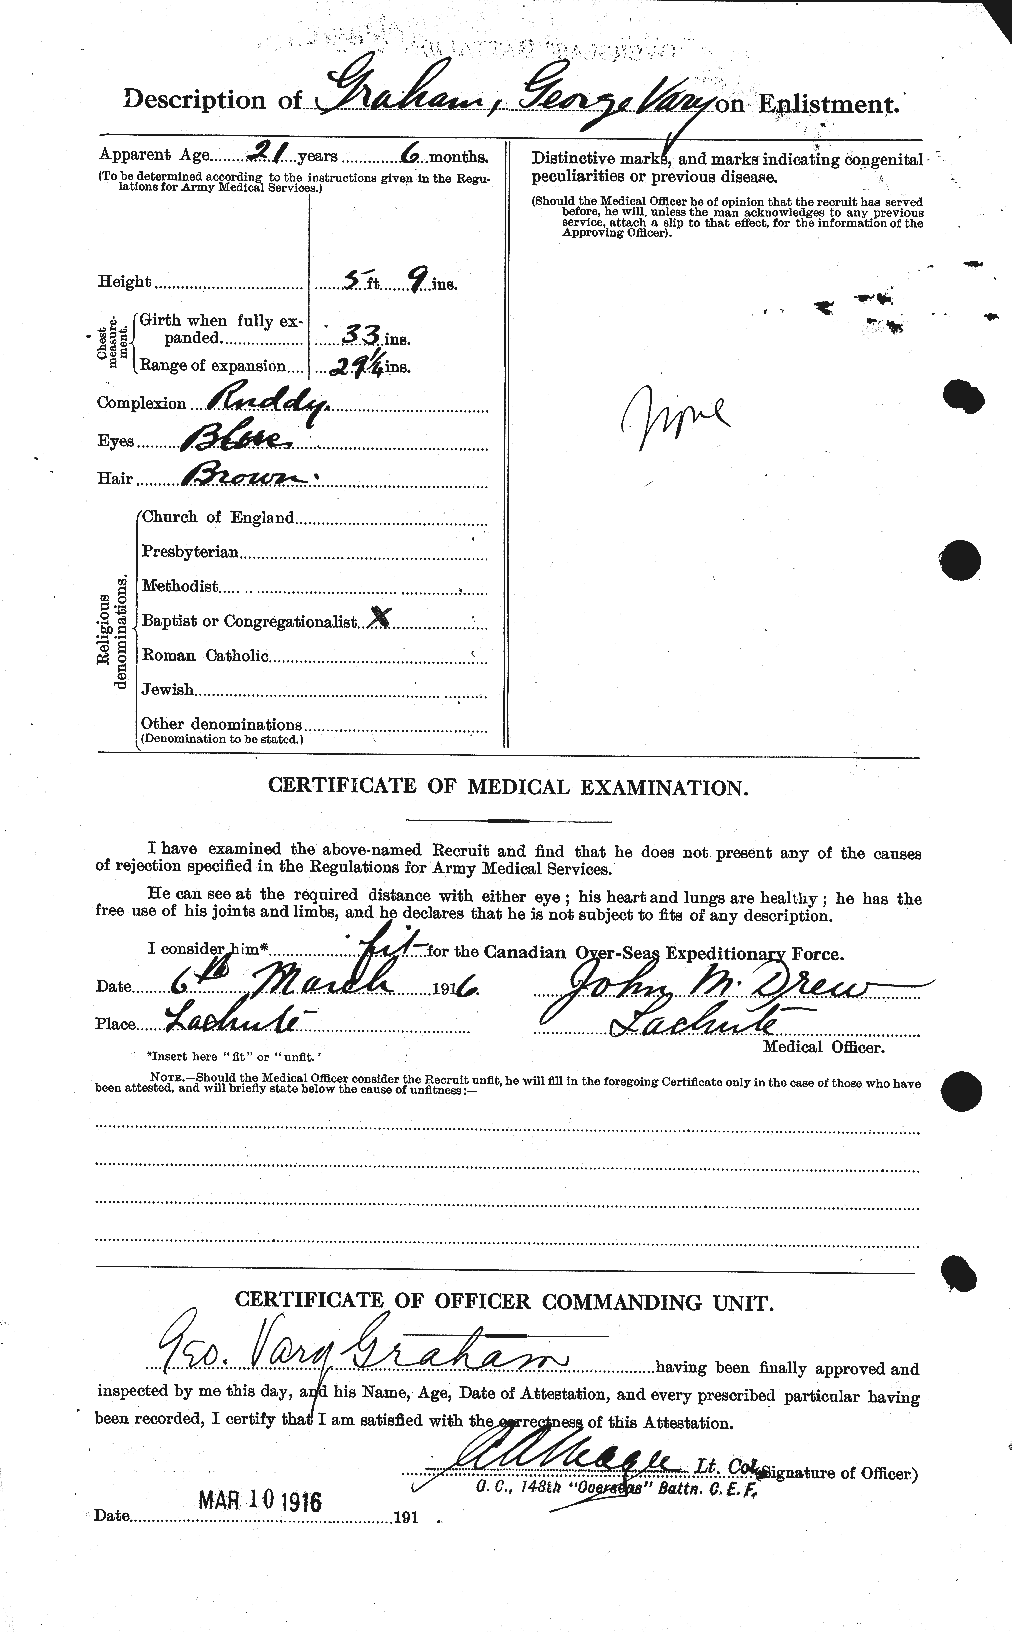 Personnel Records of the First World War - CEF 357674b